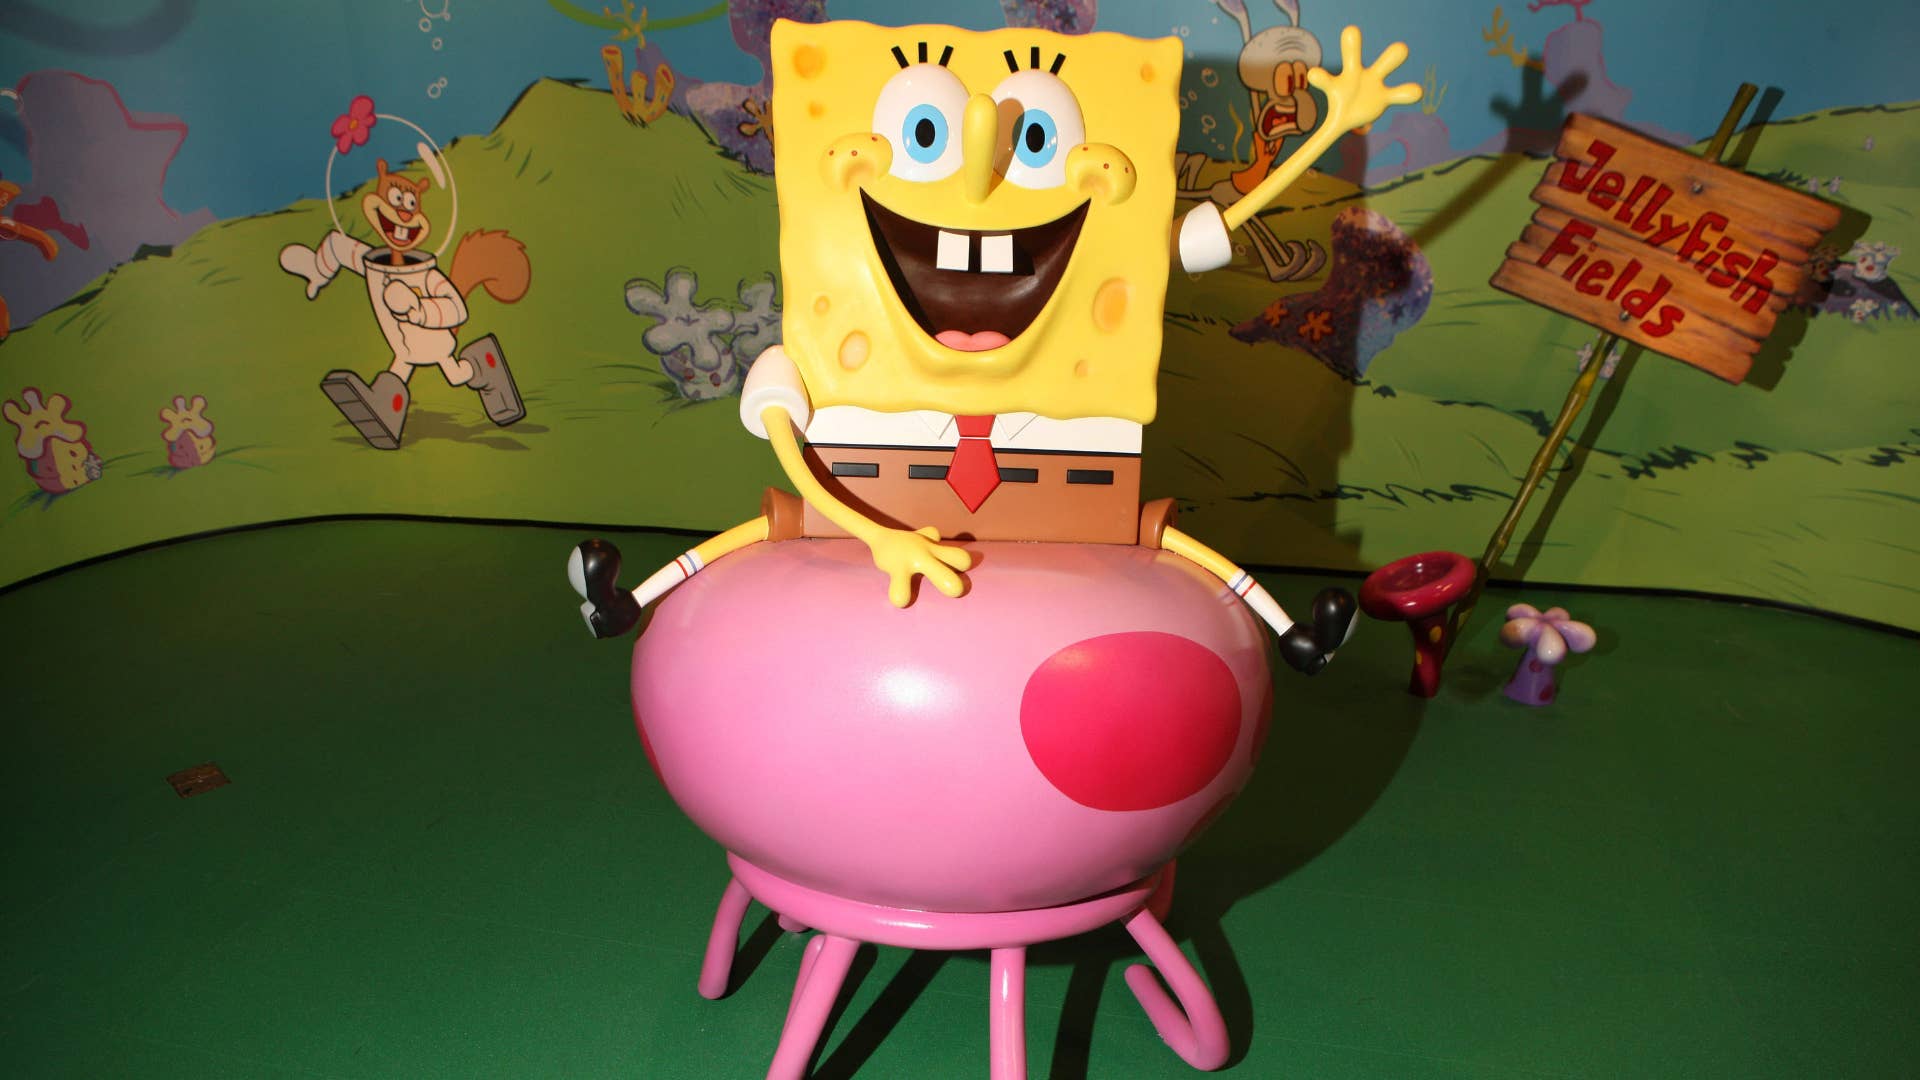 A picture of the Spongebob Squarepants wax figure unveiling at Madame Tussauds.